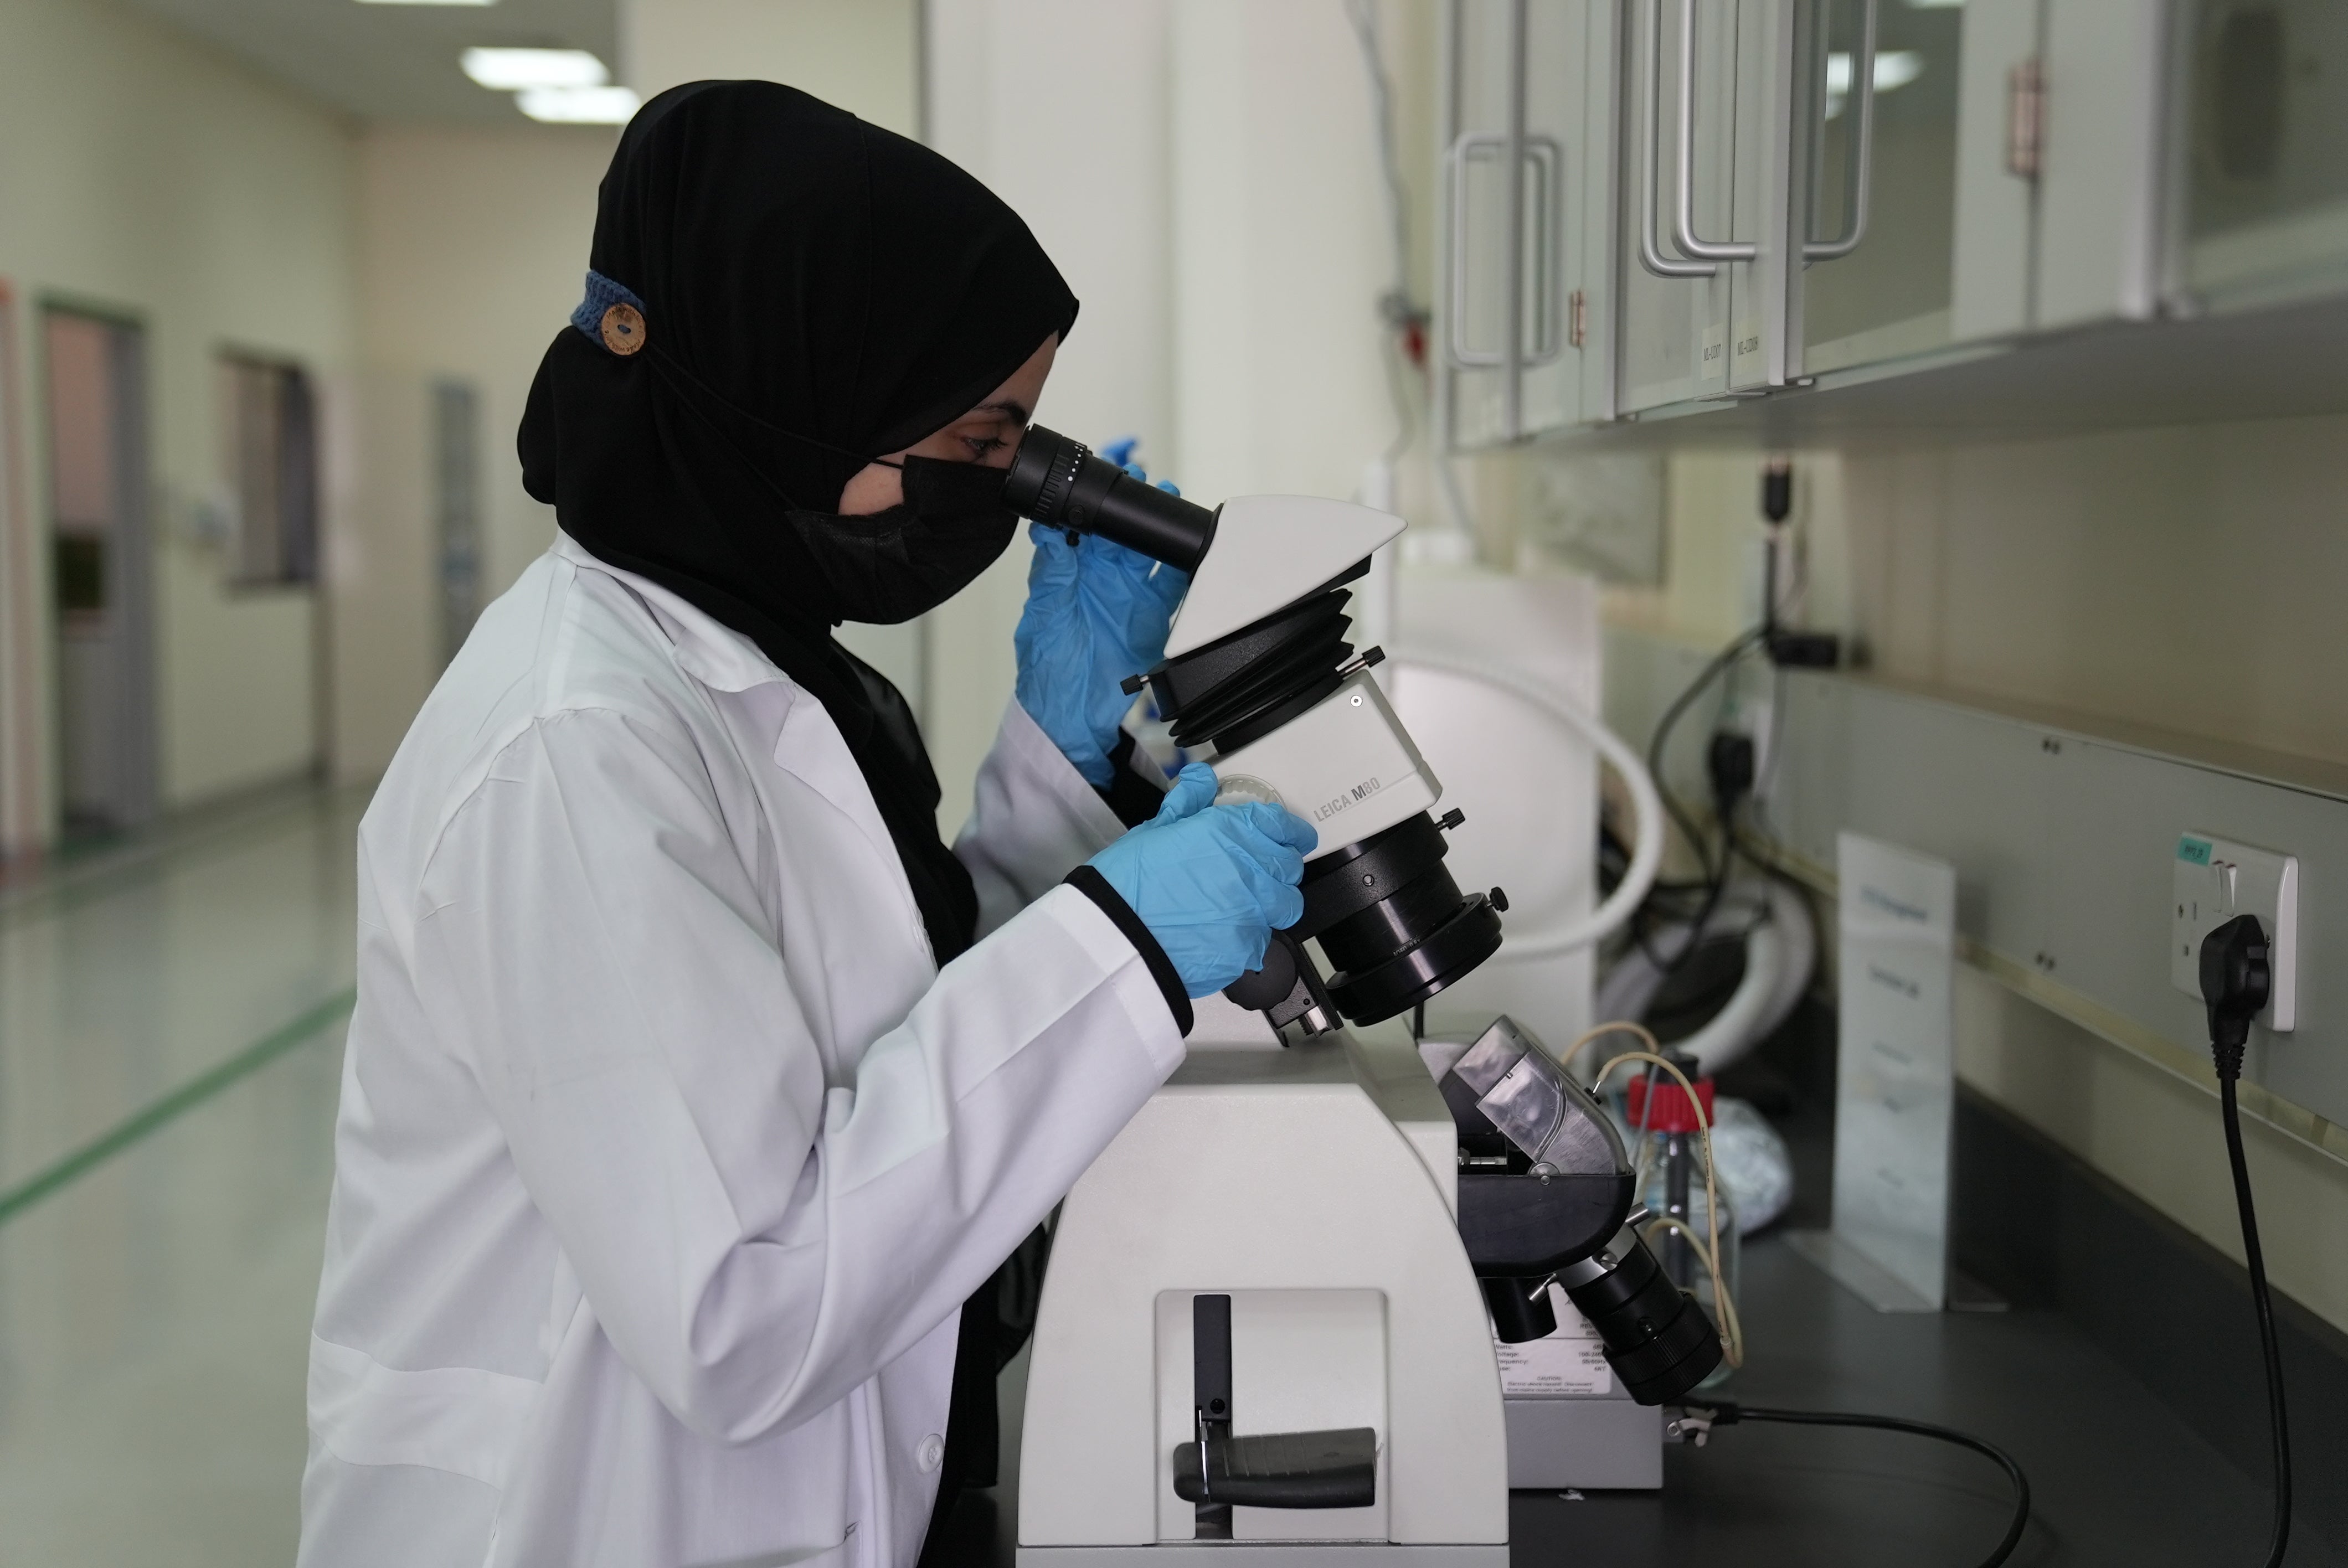 Researcher working at the Desalination Technology Research Institute (DTRI) at SWCC